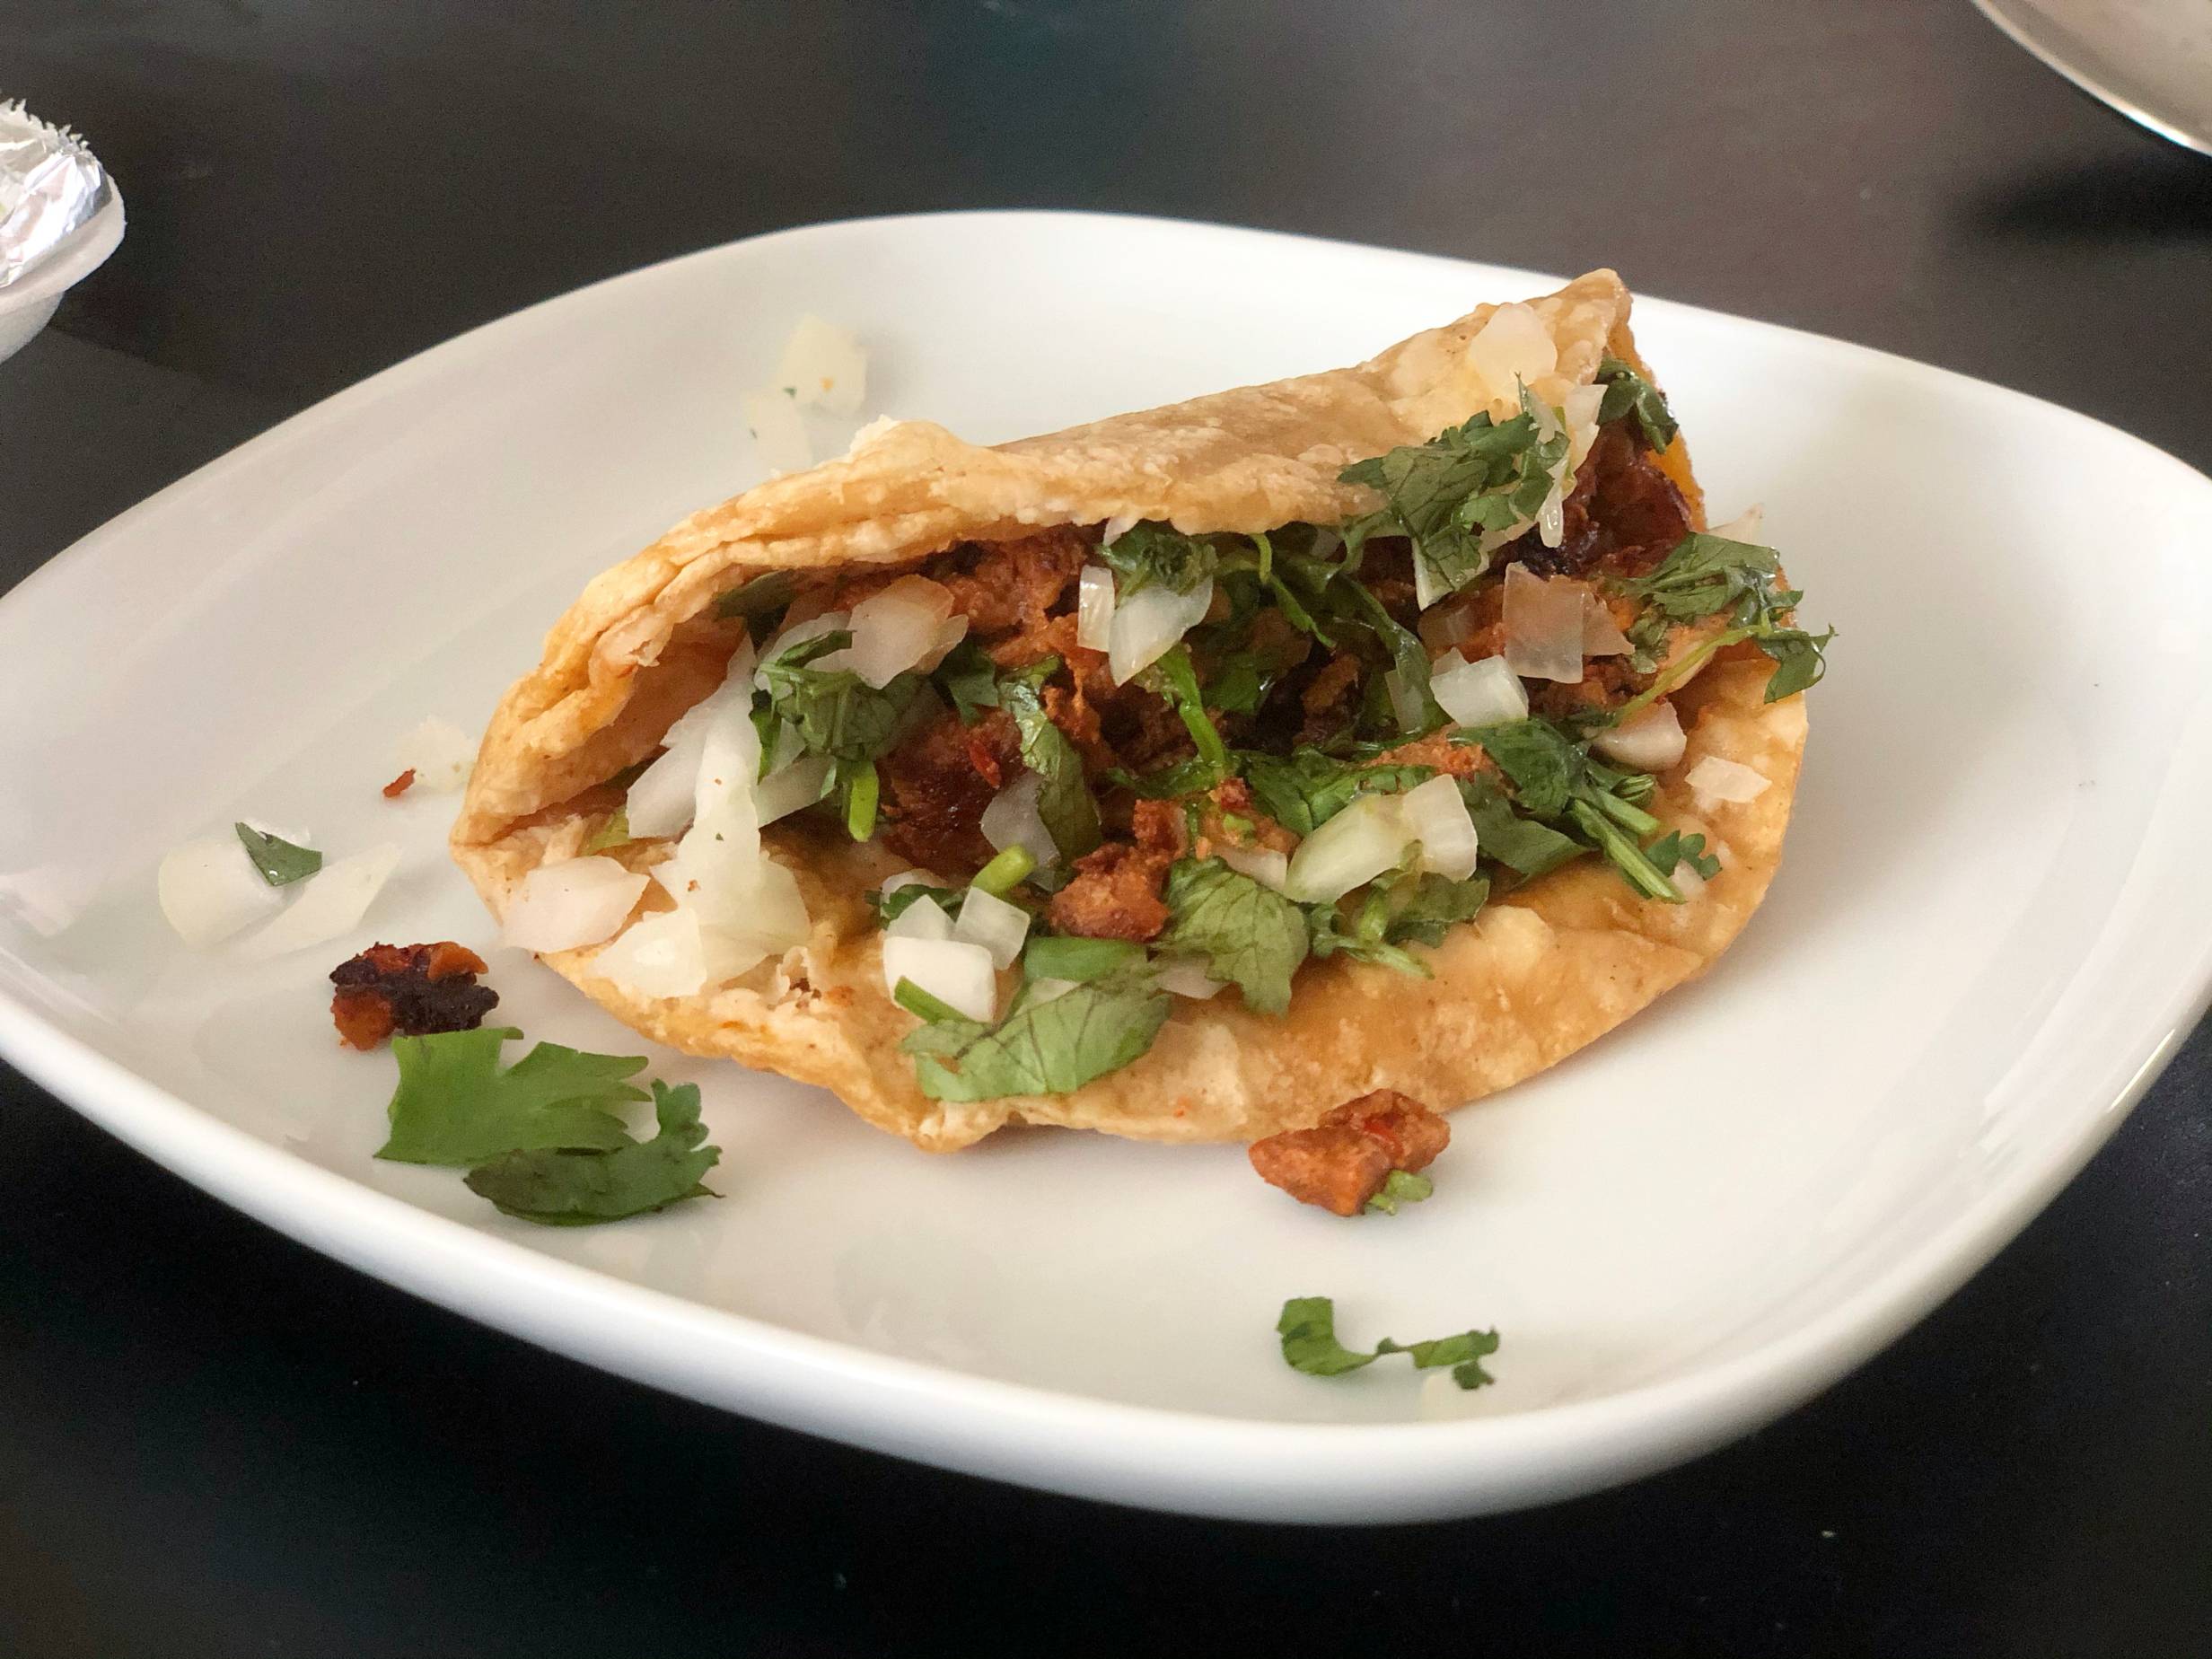 A pastor taco on a corn tortilla is overflowing with pork, cilantro, and onions on a white plate. Photo by Alyssa Buckley.